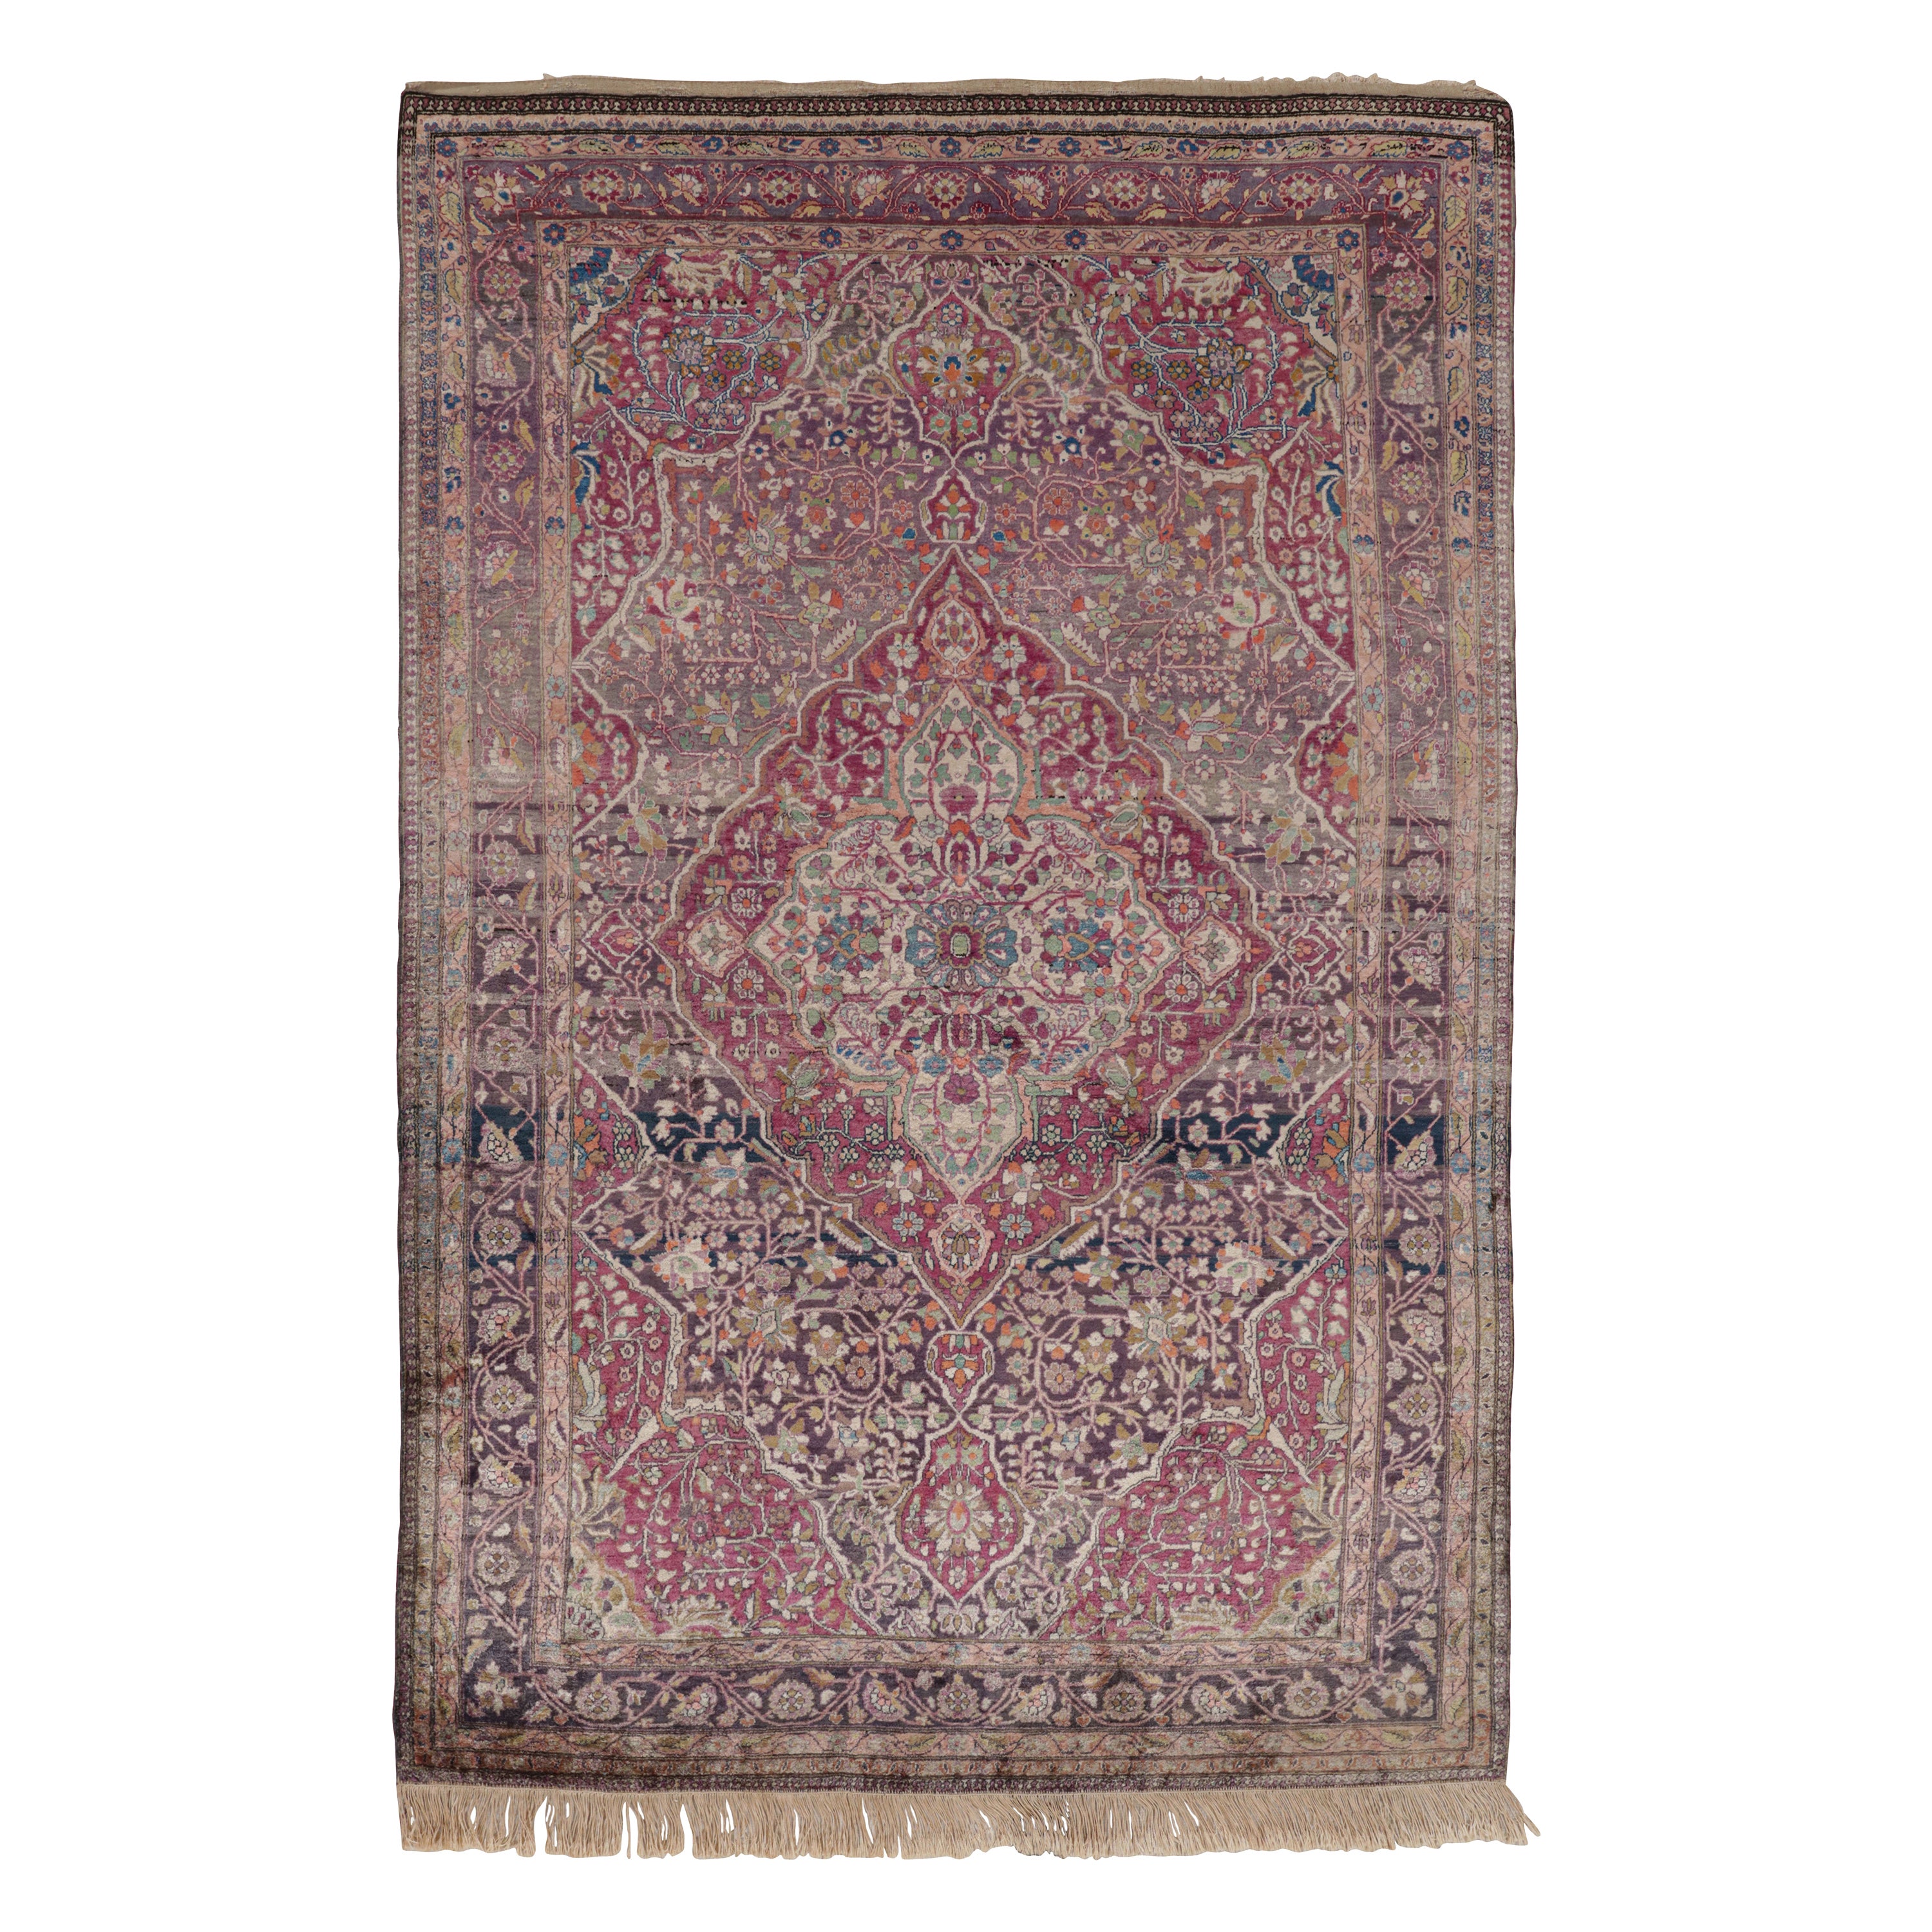 Antique Persian Kashan Rug with Medallion and Floral Patterns, from Rug & Kilim